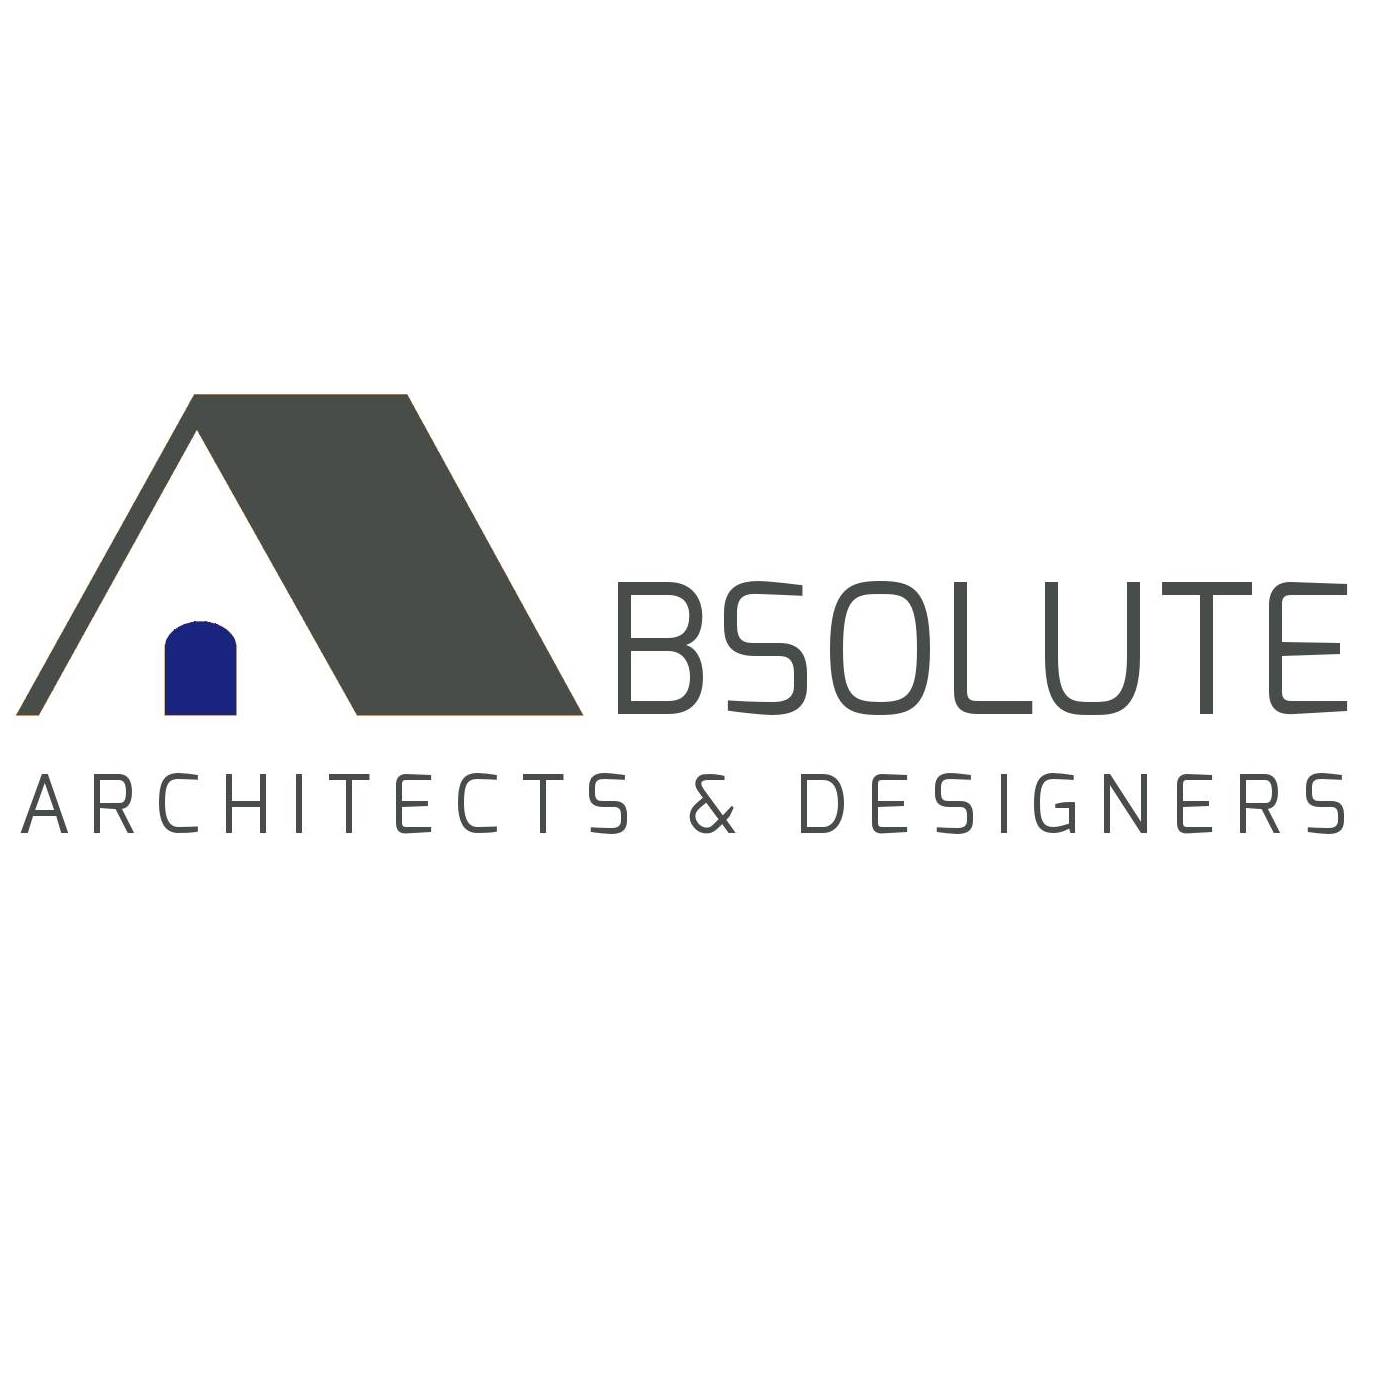 ABSOLUTE Architects and Designers|Legal Services|Professional Services